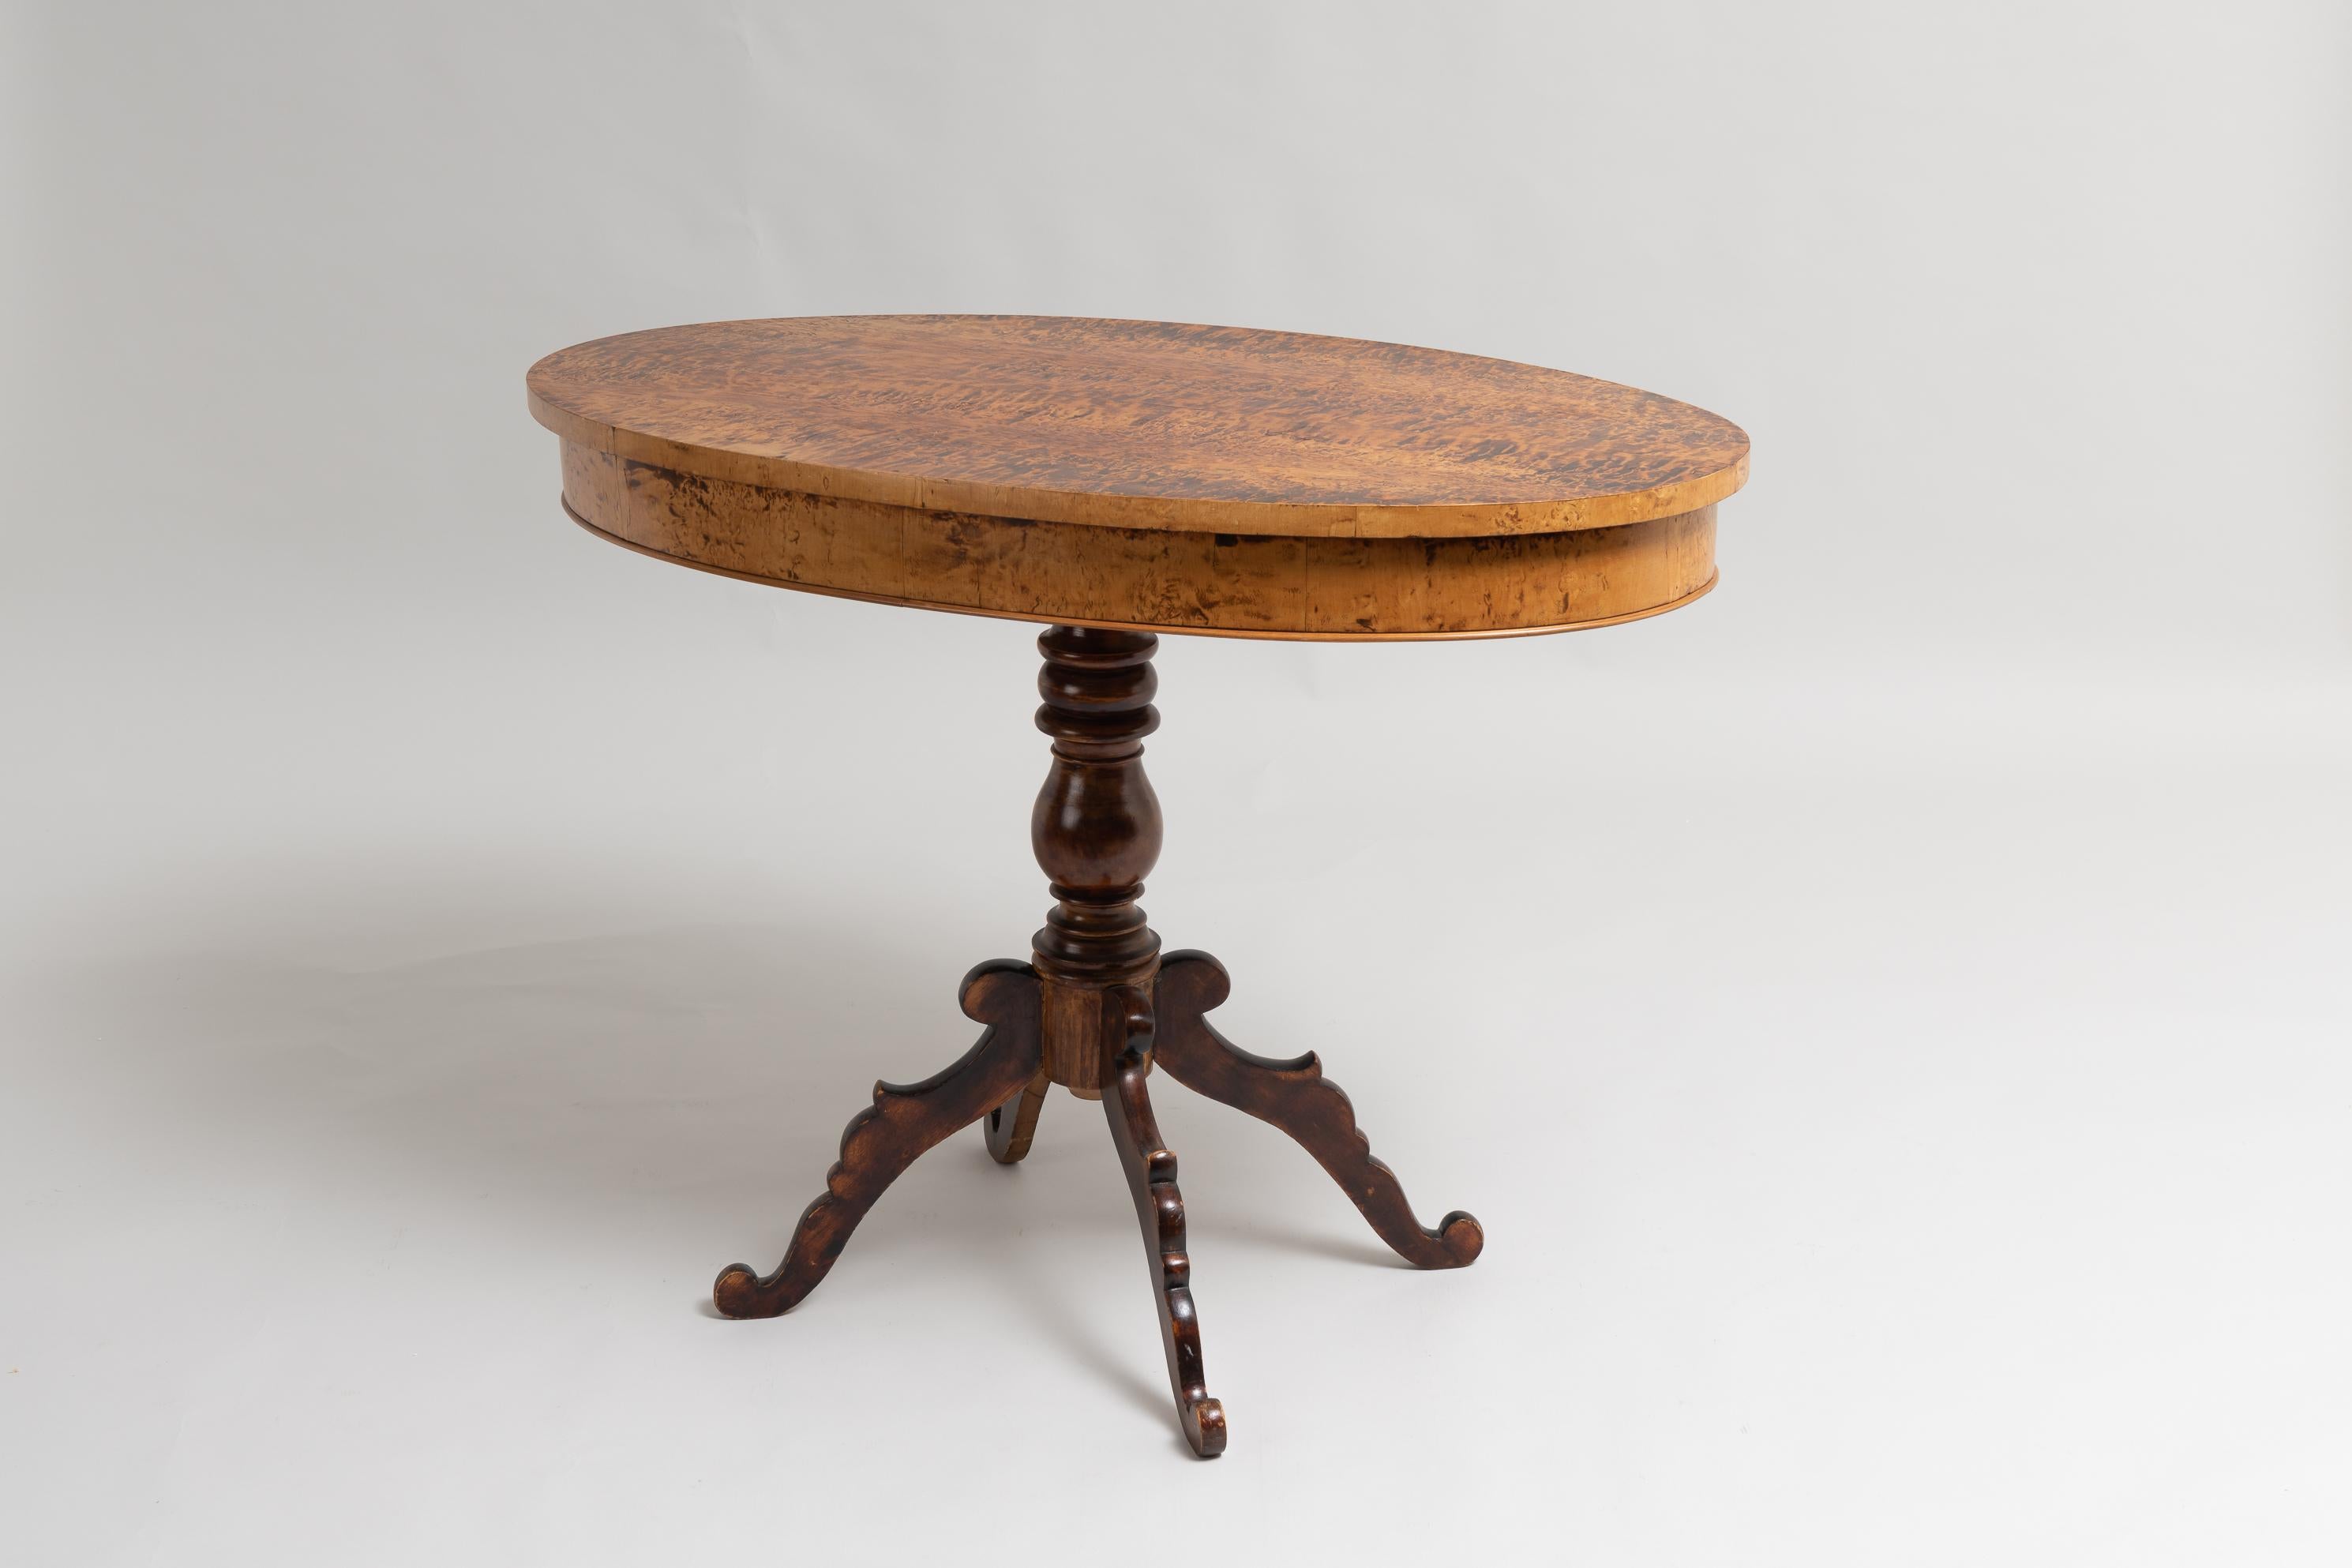 Rococo revival centre table from Sweden made during 1860 to 1870. The table has a single column base with 4 legs and an oval table top. The table top is veneered with birch root and the surface has been treated so the grain is more pronounced and